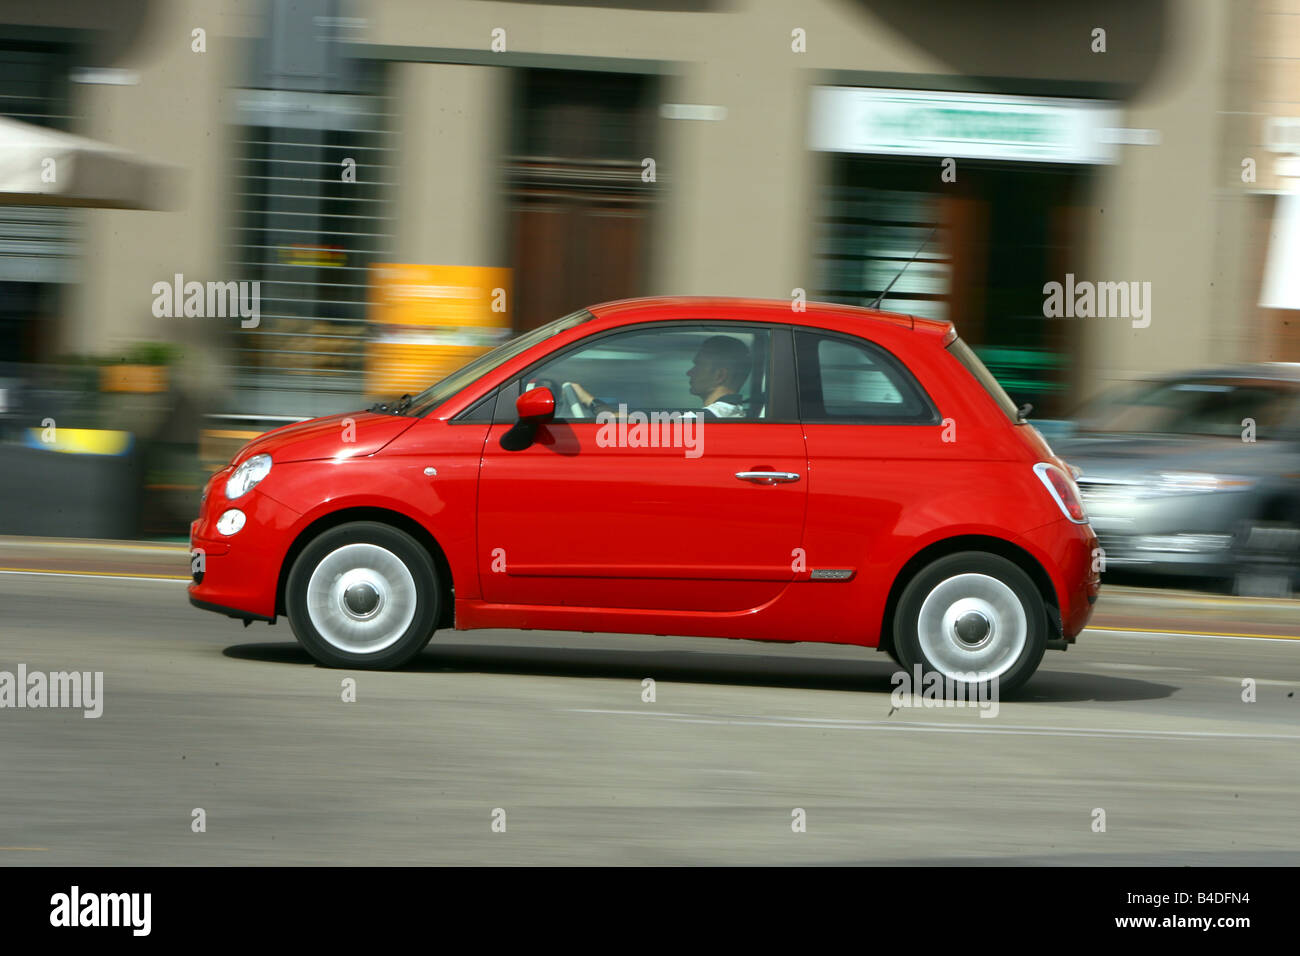 Fiat 500, model year 2007-, red, driving, side view, City Stock Photo